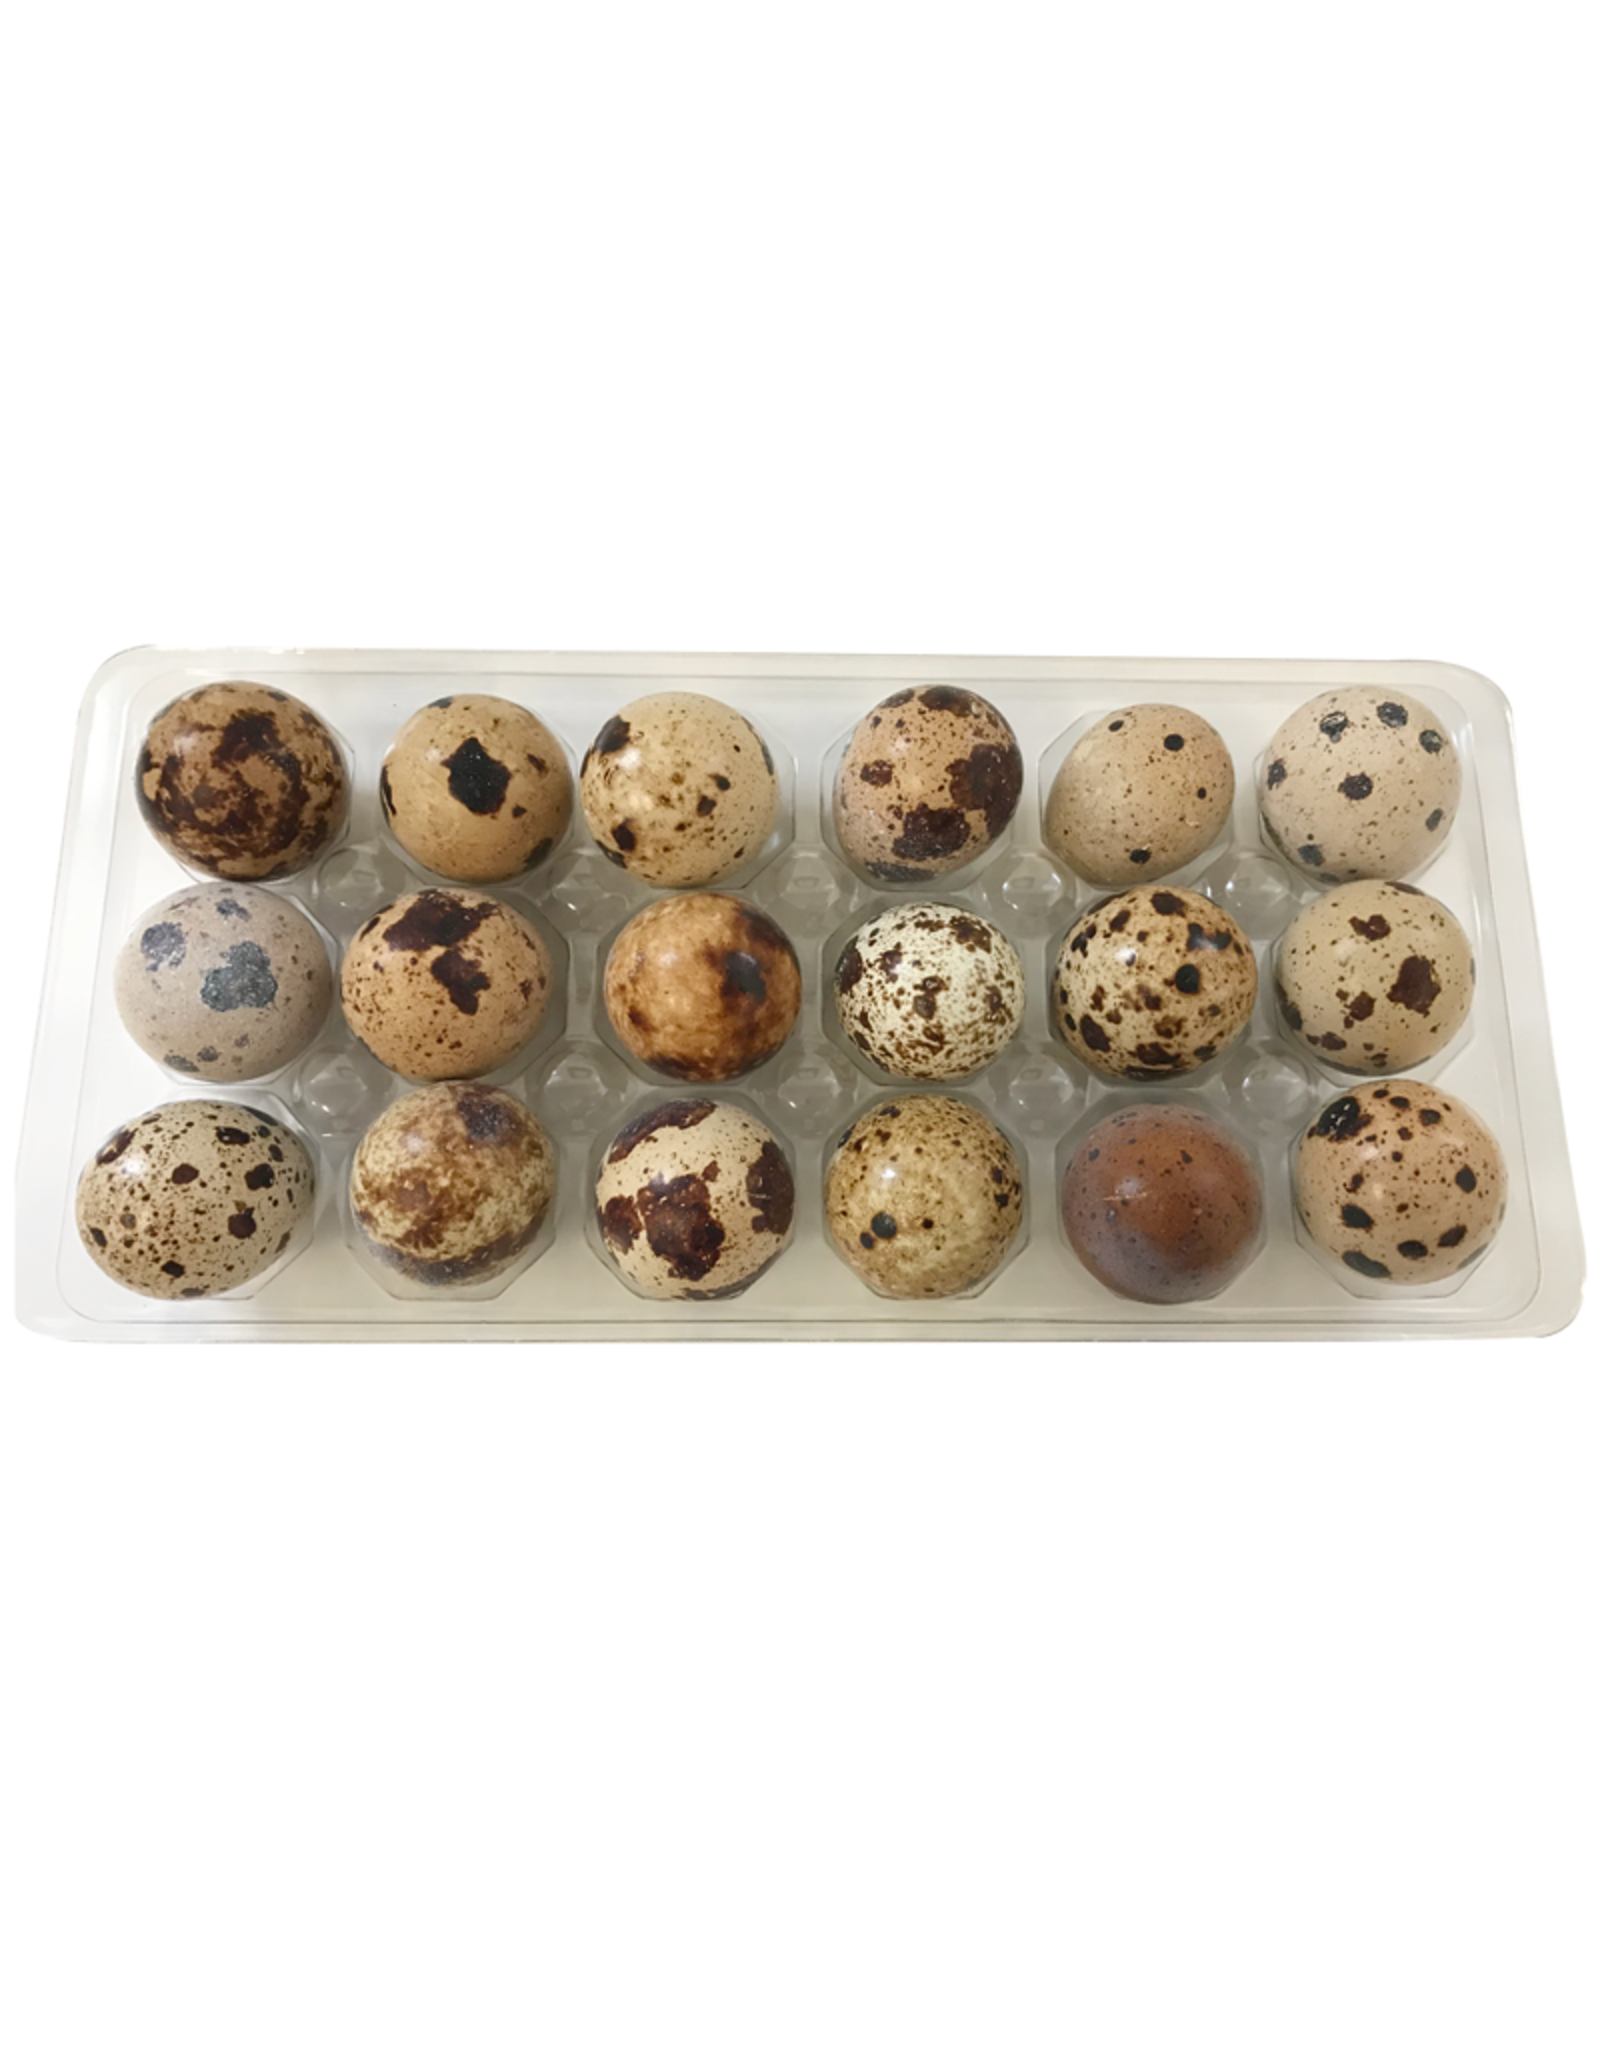 Big Country Raw Frozen Quail Eggs 18 Count